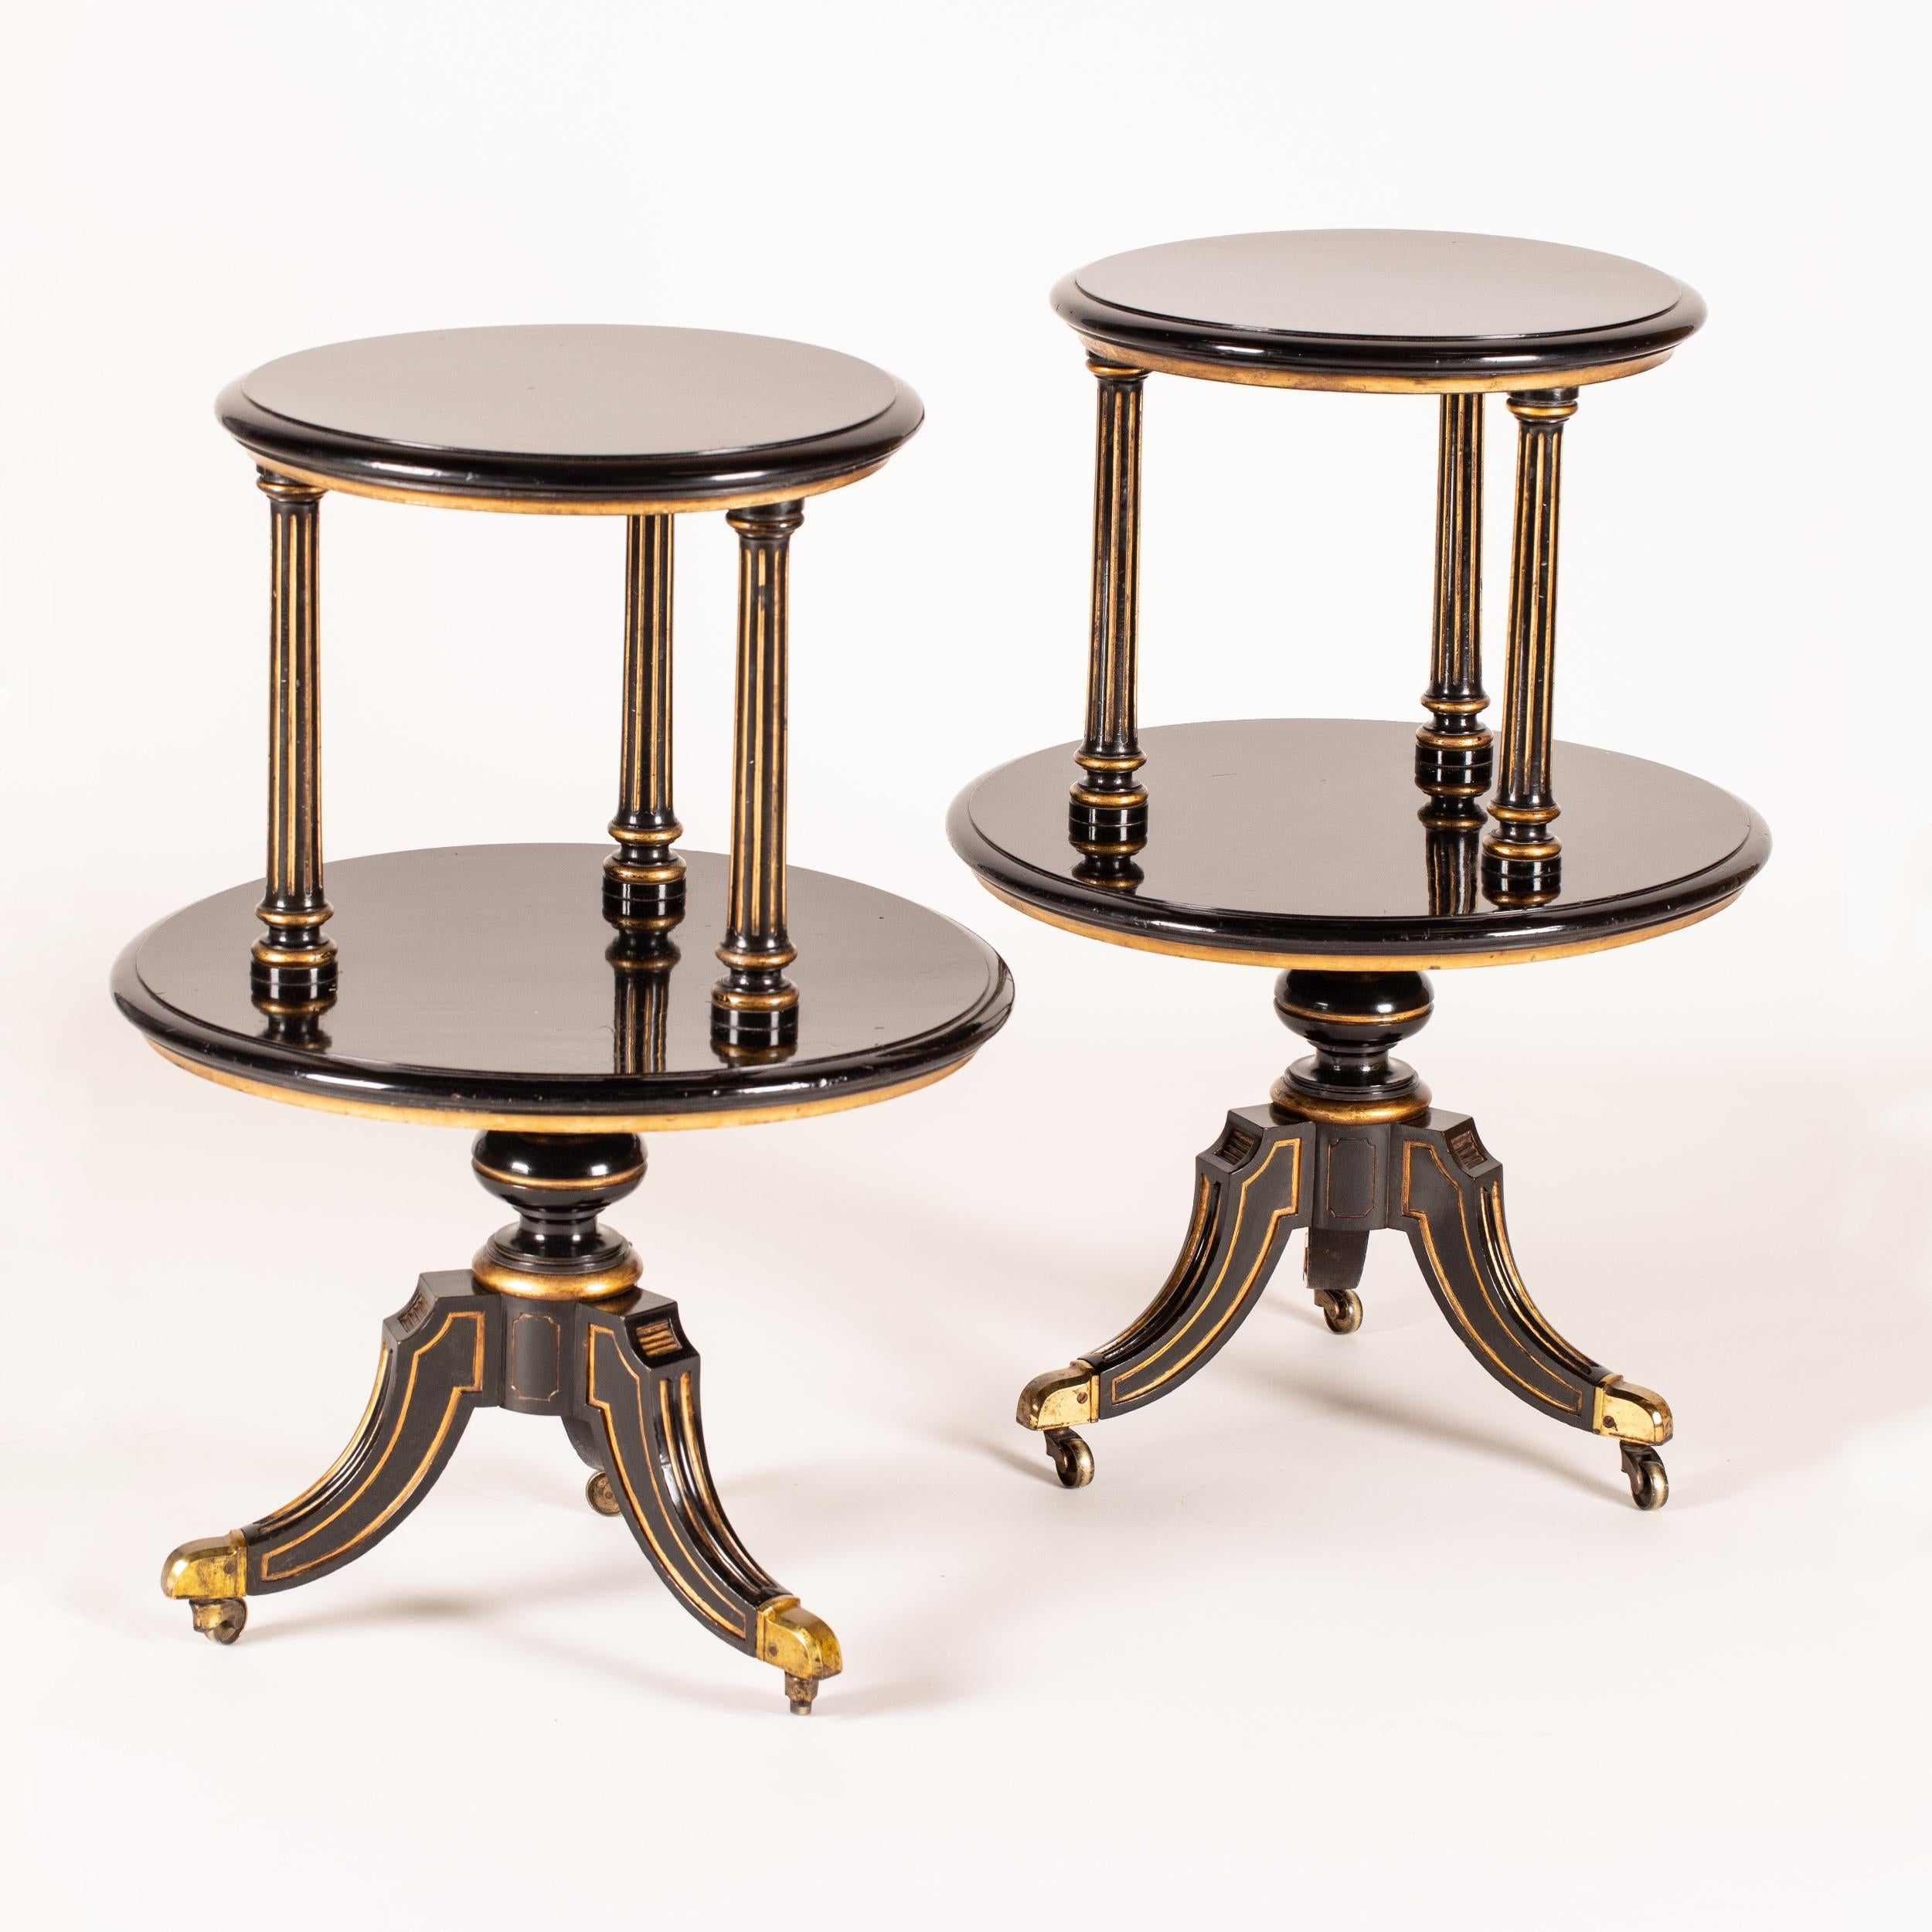 A pair of black lacquered Étagères
In the early aesthetic Manner

The circular tables having lacquered surfaces with a striking sheen, highlighted by parcel gilt details and tripartite swept legs terminating in brass castors; above, the baluster